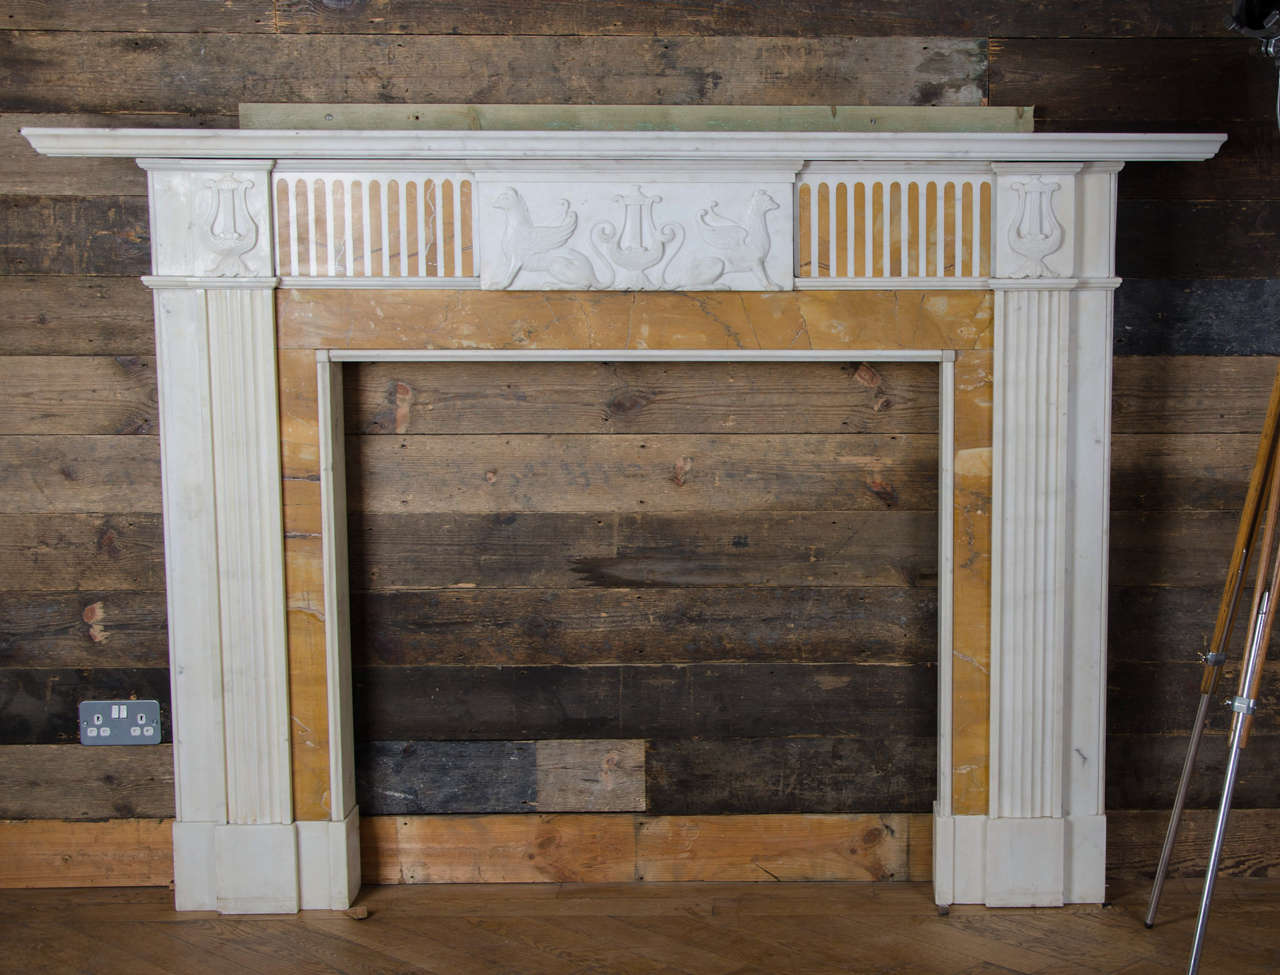 An attractive English Georgian style surround with contrasting Sienna marble inlay. This fireplace surround features a carved marble central plaque featuring two Griffins flanking a stylised lute motif, which is repeated on each endblock. The